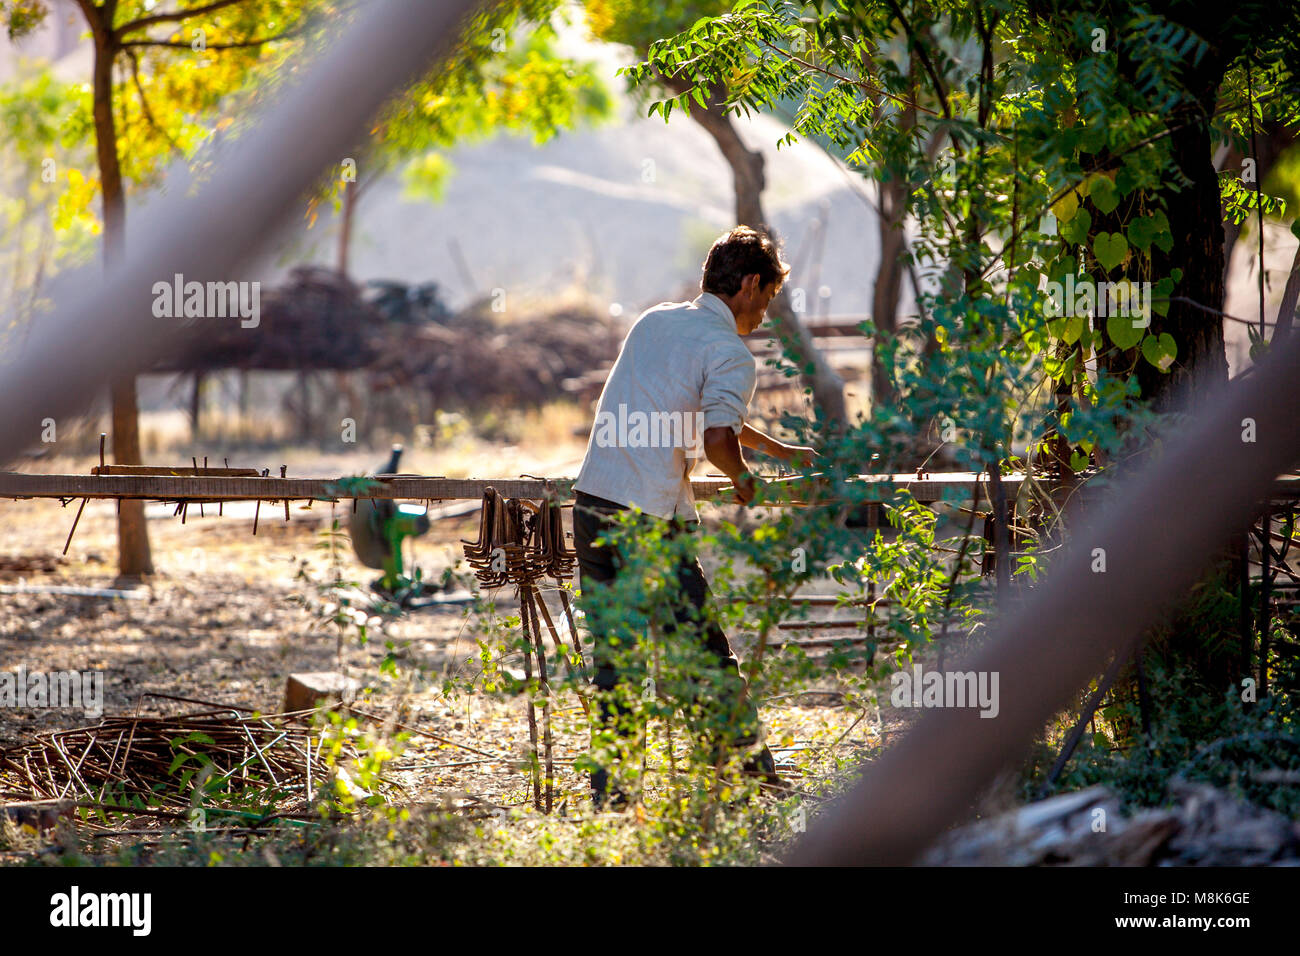 A handsome young man is working outdoor in Indian village Nipal, bending iron rods during beautiful sunny day under trees. The light is golden warm as Stock Photo